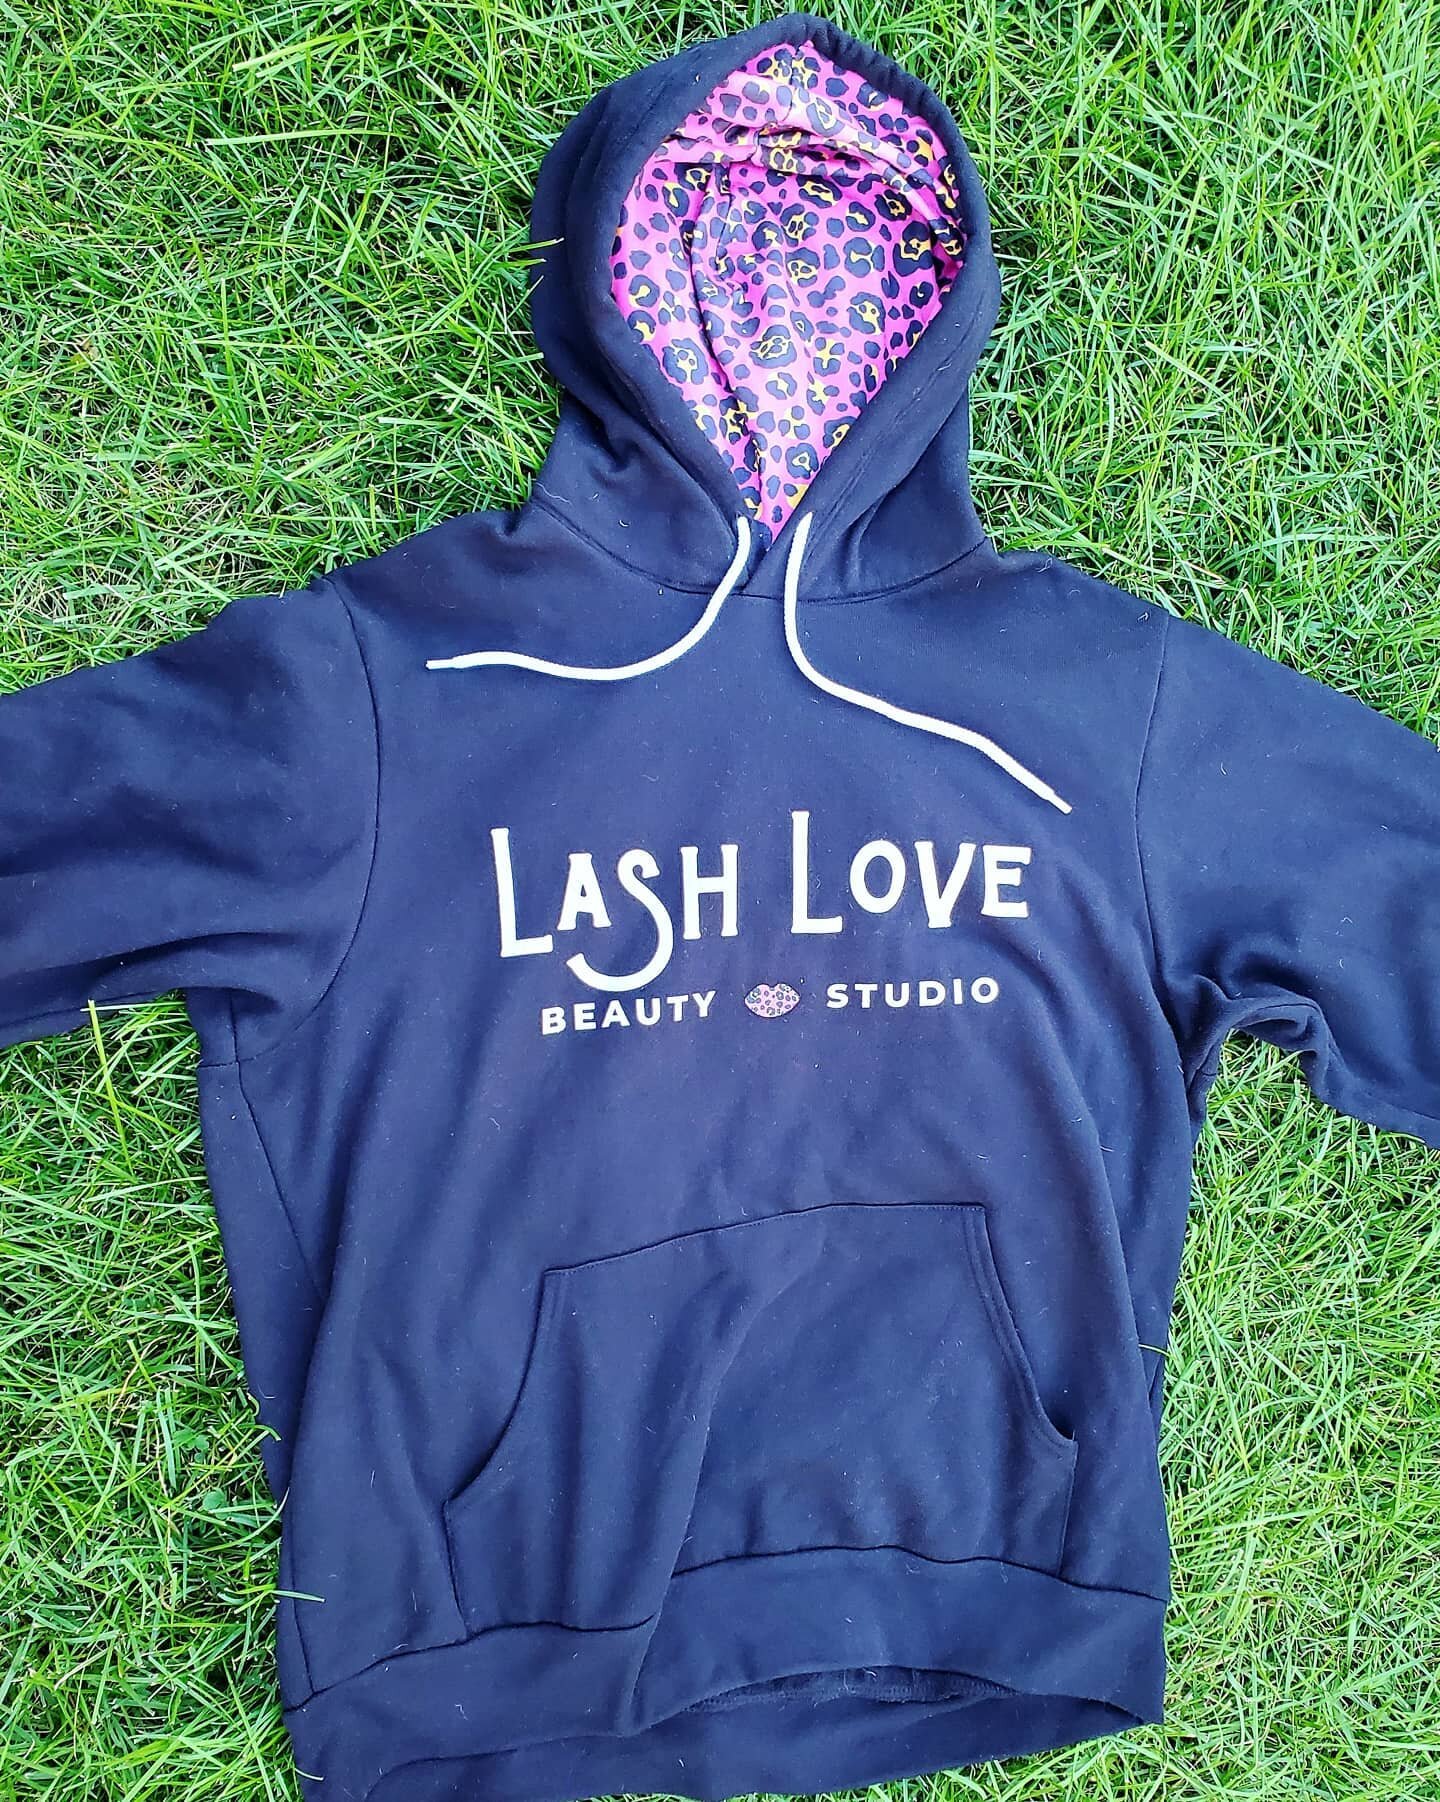 ❗COMING SOON❗
Lash Love Beauty apparel, featuring one of the softest hoodie's you'll ever touch! Swipe to see more ➡️
Will be available to order through our website www.lashlovebeauty.com 💋